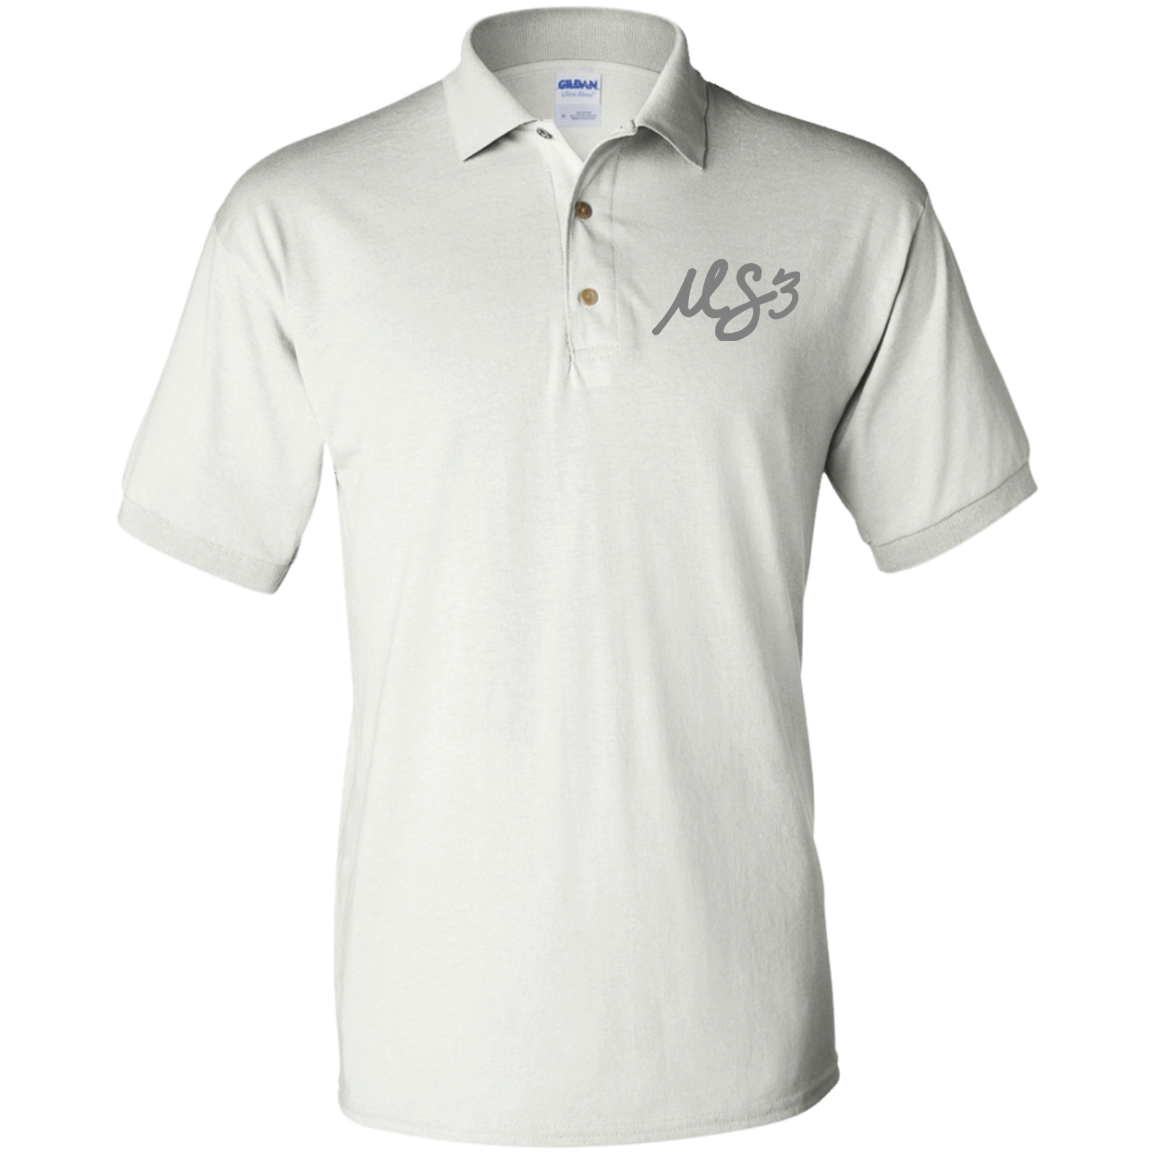 Grey MS3 Jersey Polo